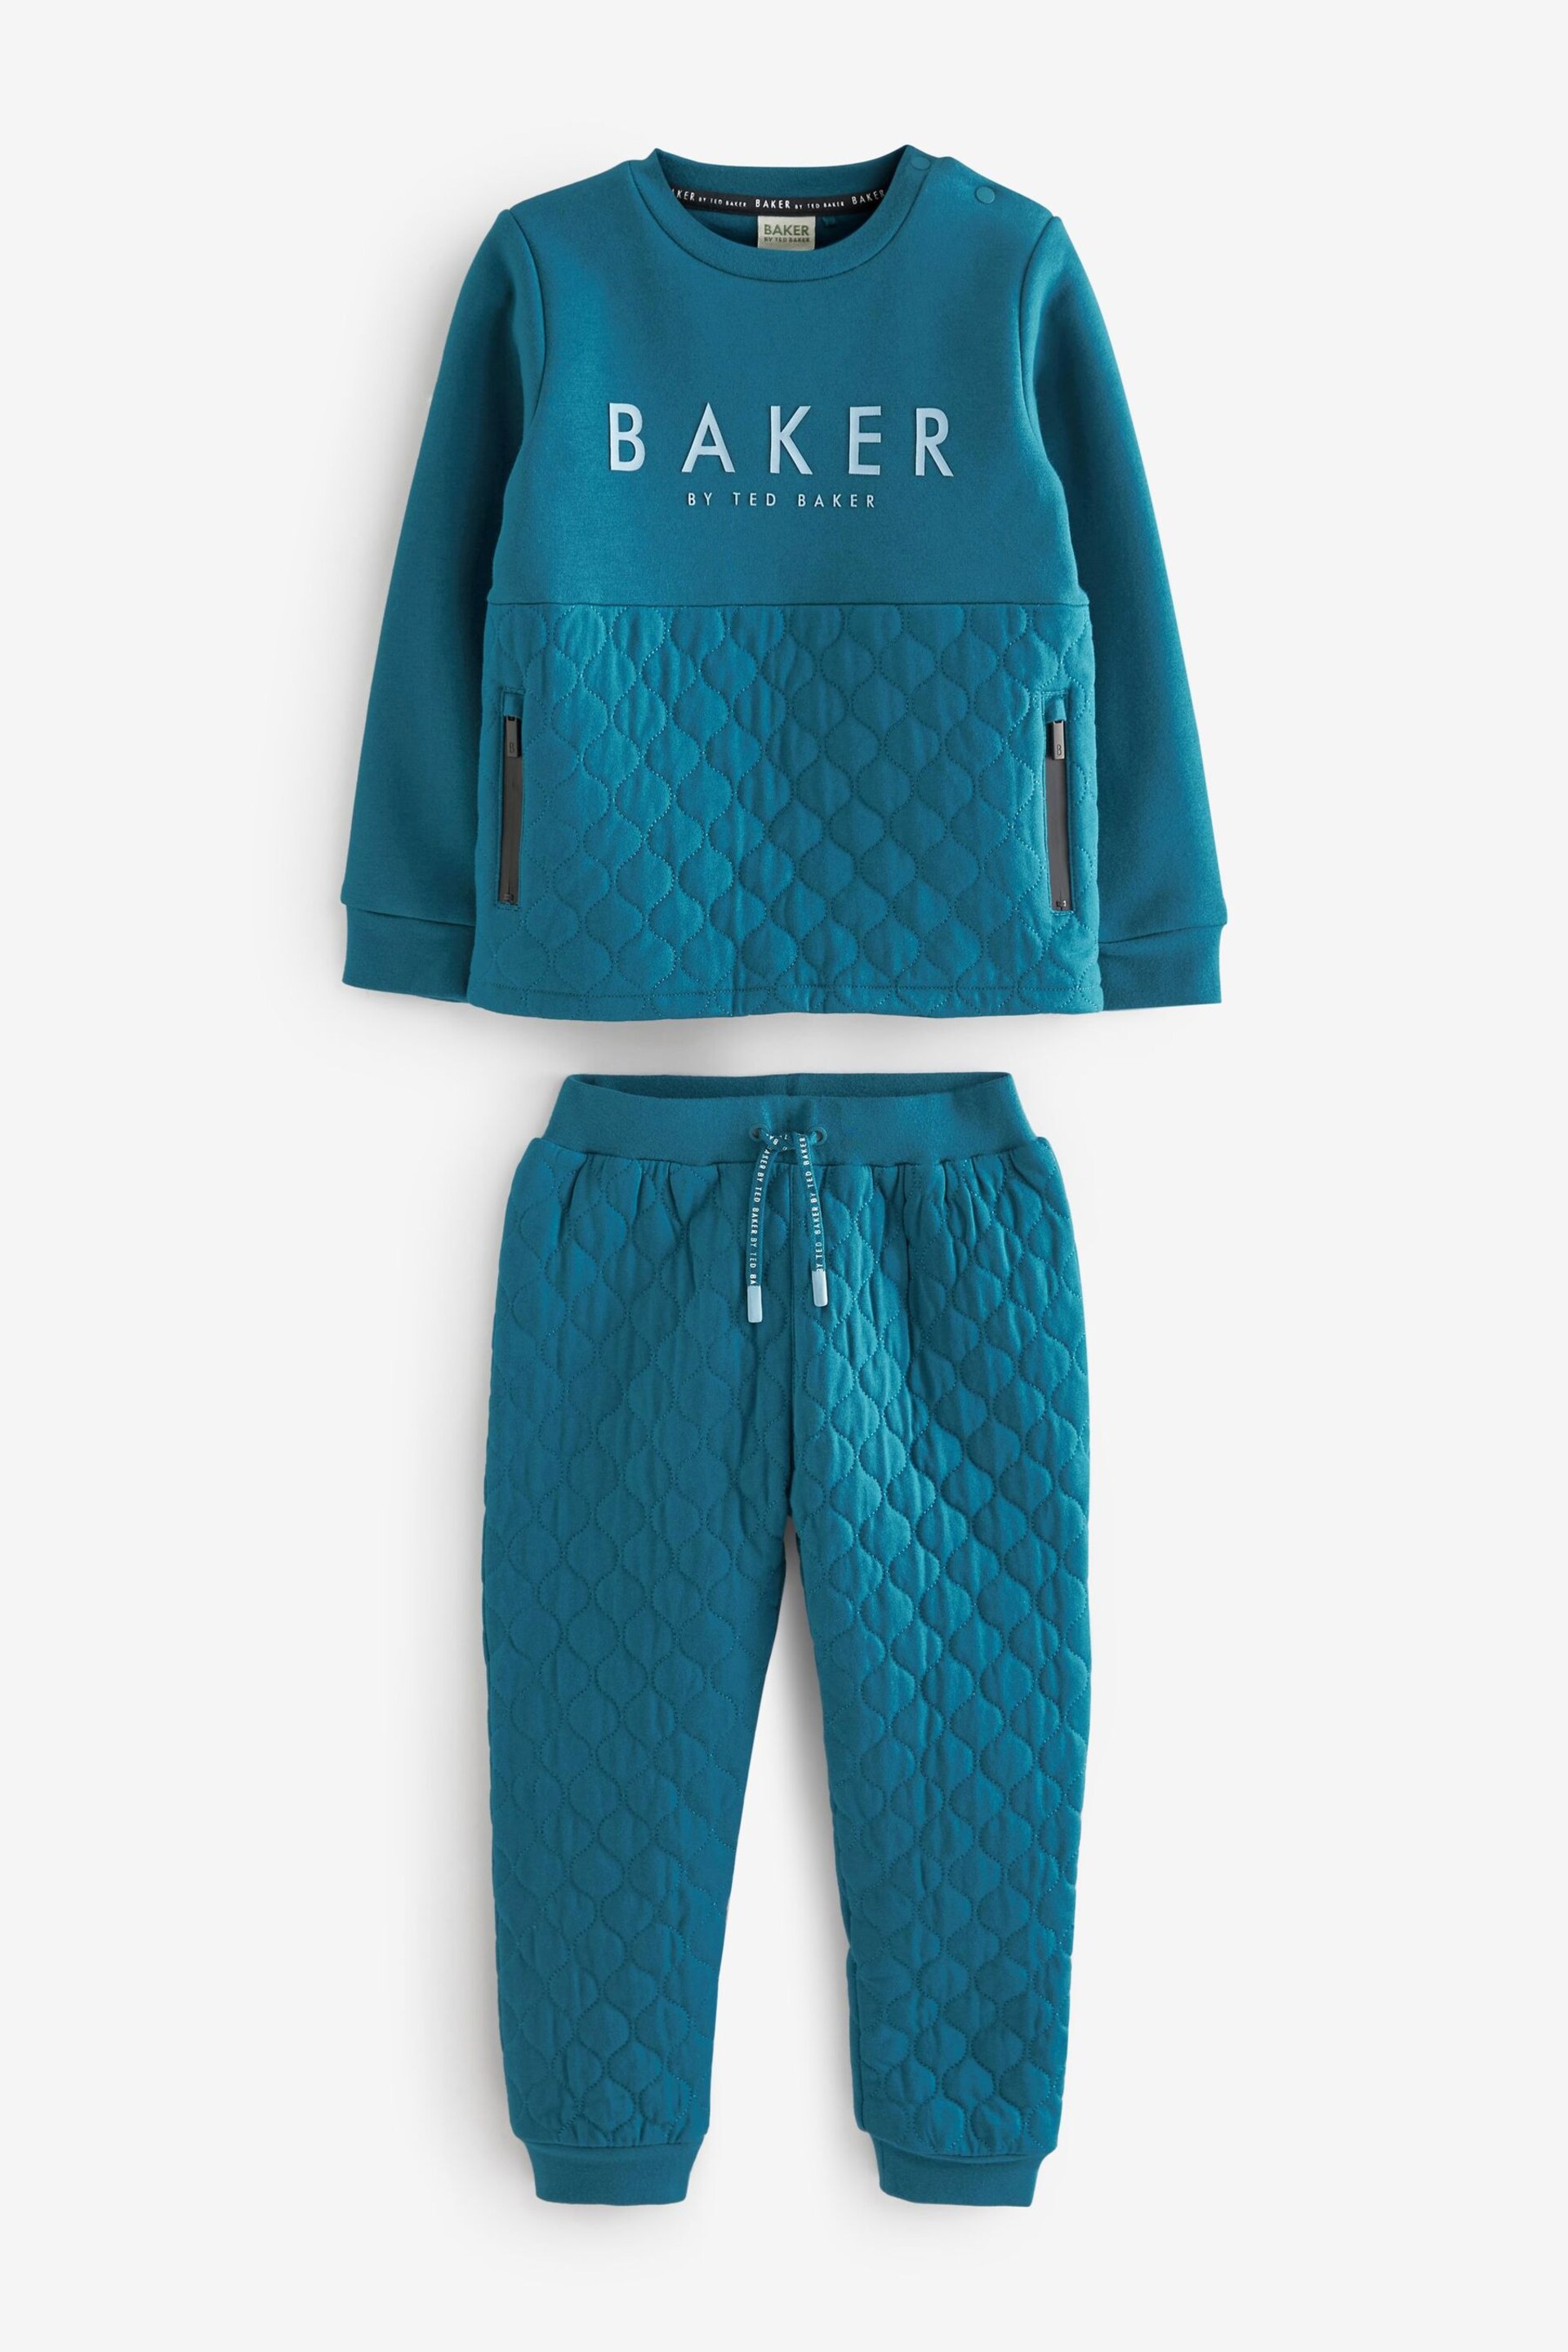 Baker by Ted Baker (0-6yrs) Quilted Sweater and Jogger Set - Image 9 of 13